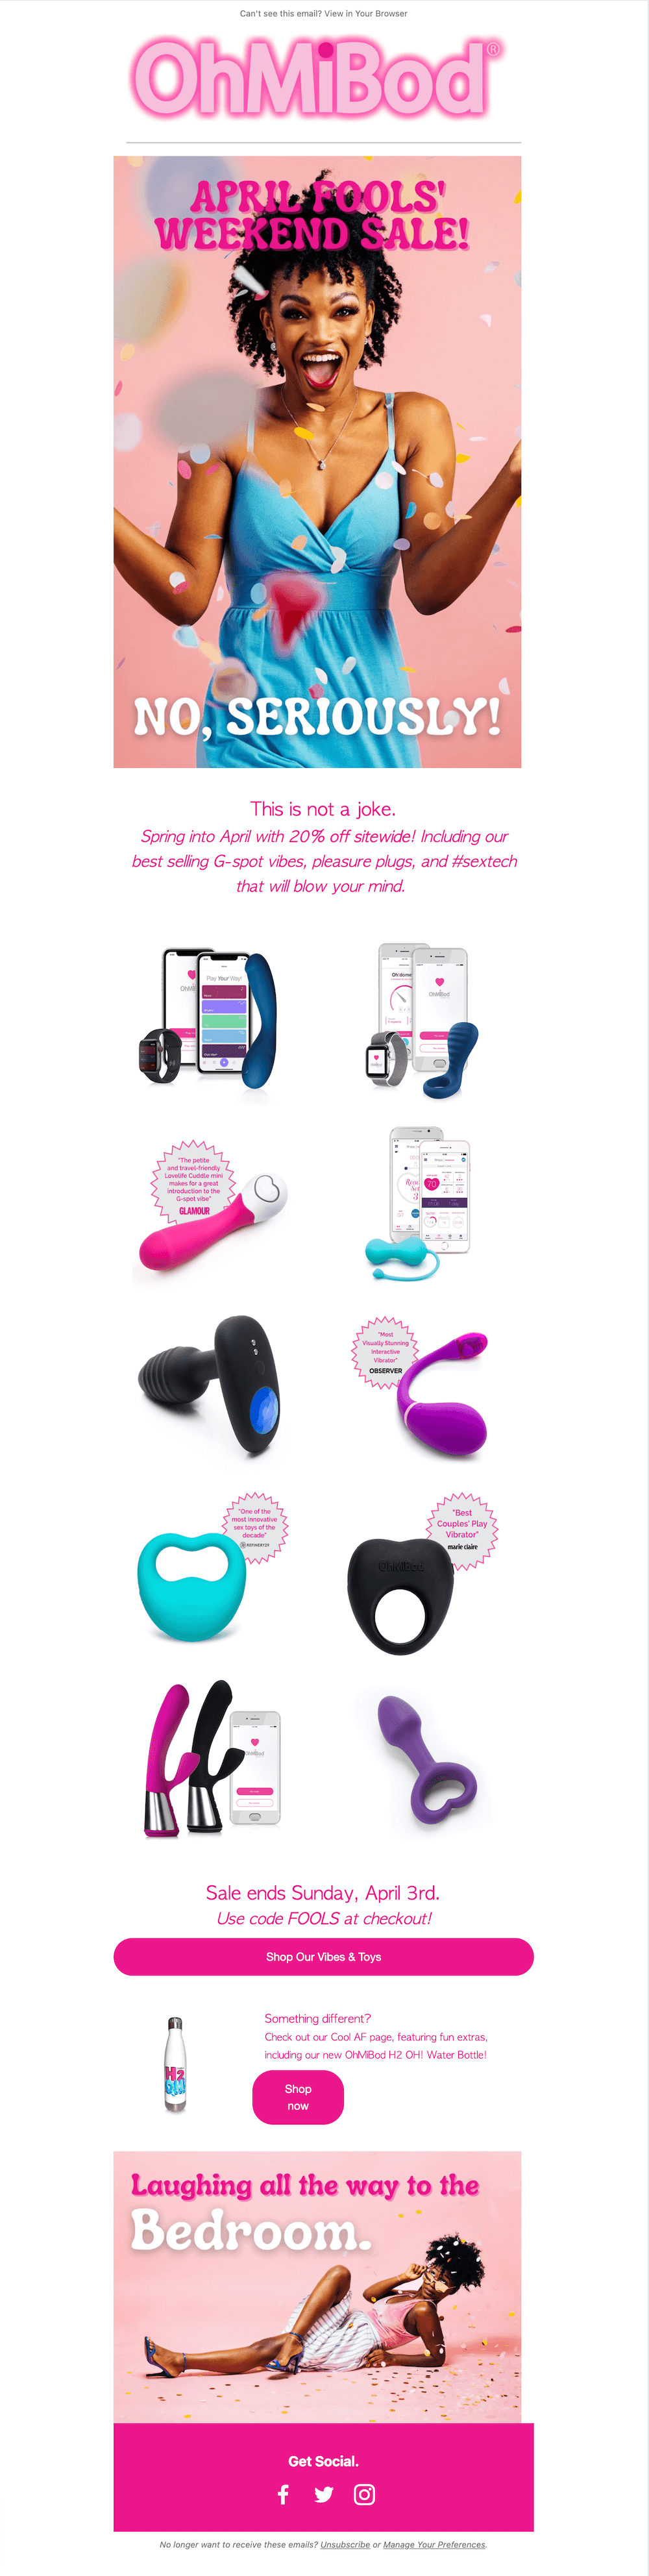 Image shows an April Fools’ Day email from OhMiBod